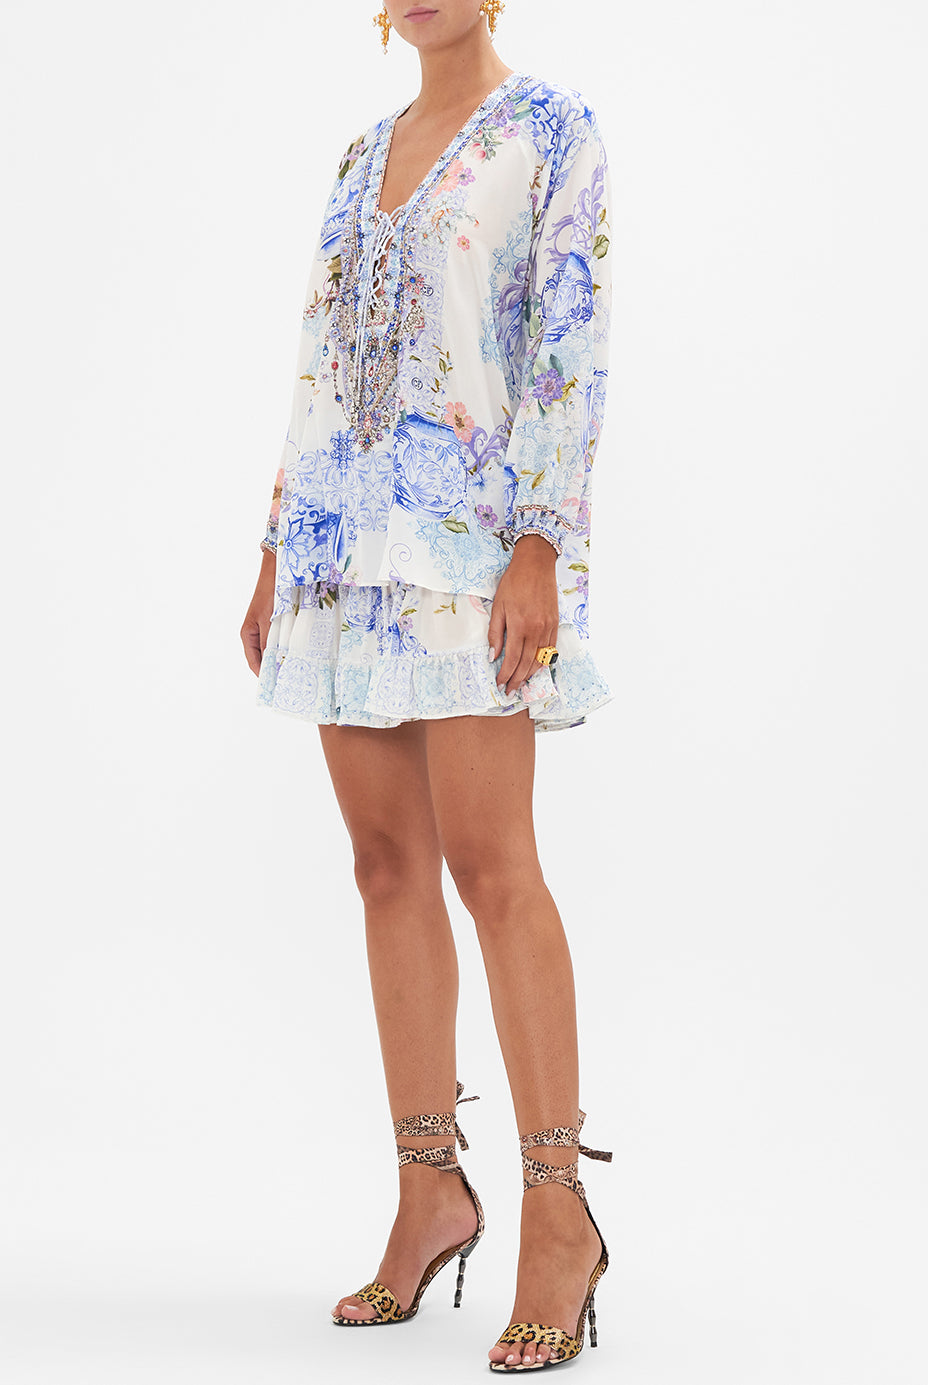 CAMILLA - Lace Up Blouse Paint Me Positano - Magpie Style